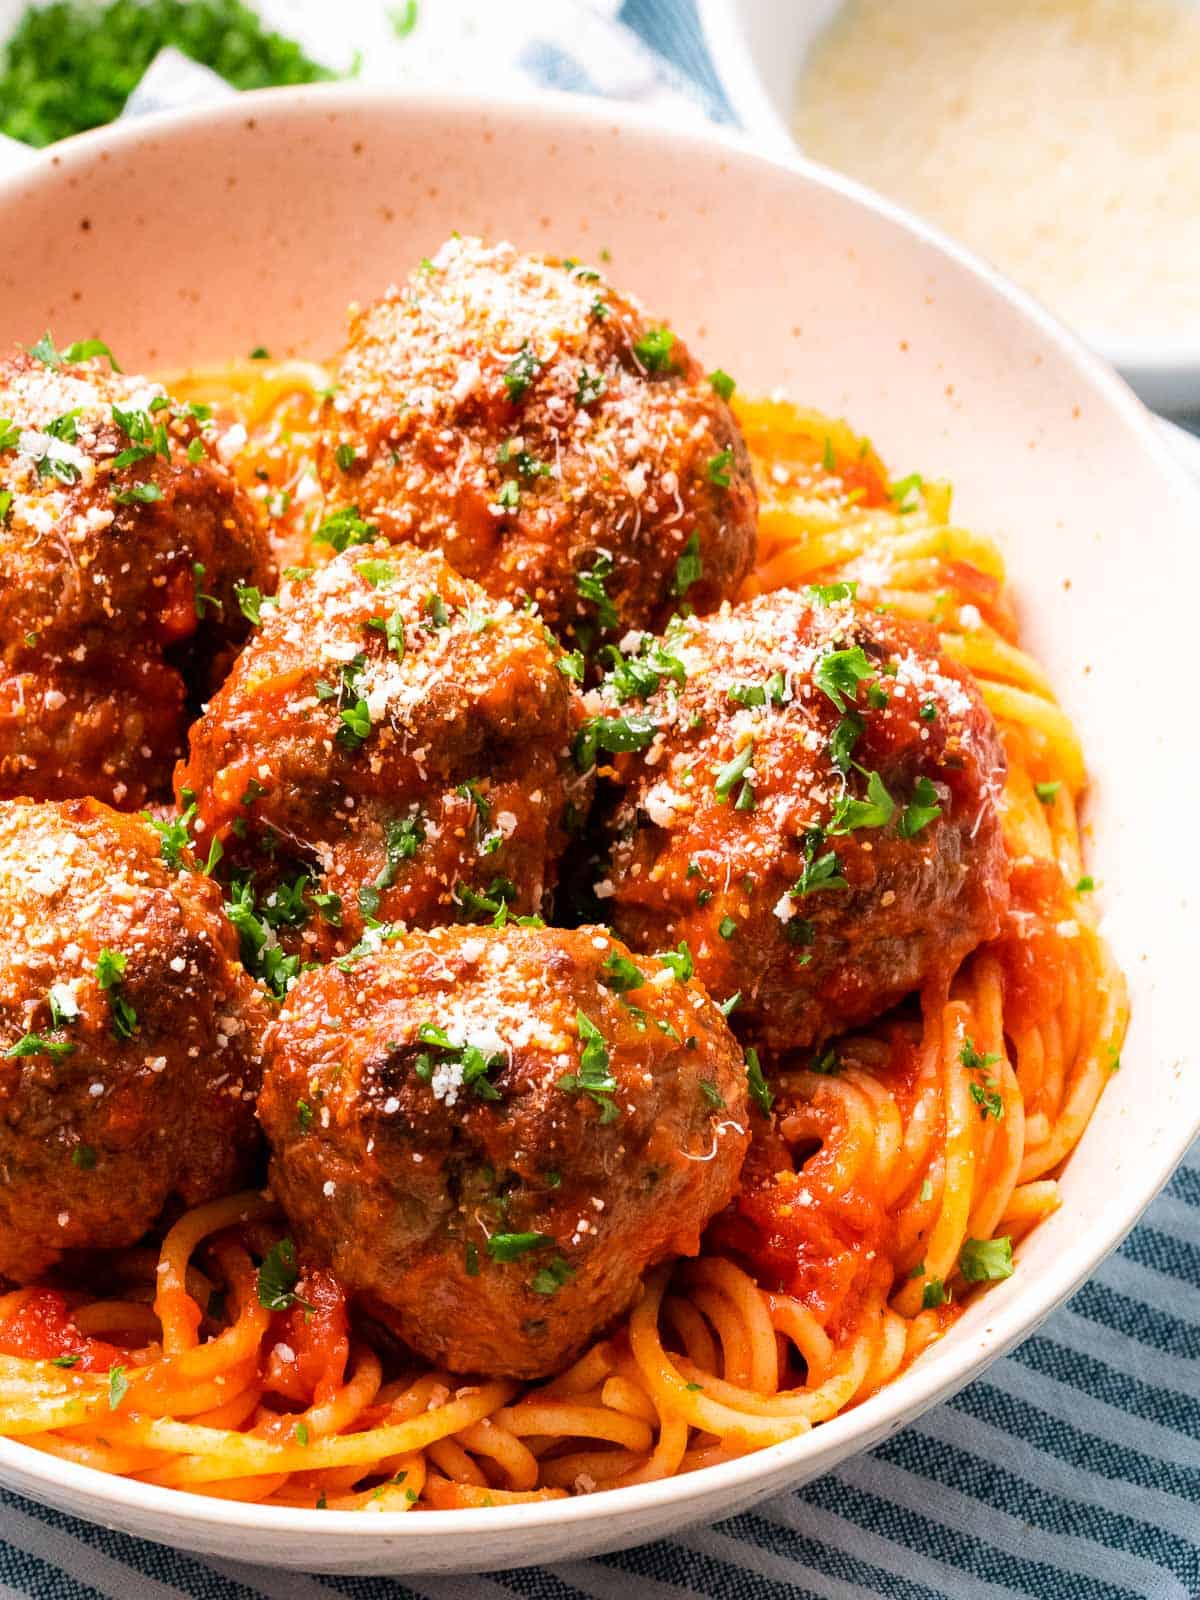 Italian meatballs baked until tender and juicy with a bowl of spaghetti.